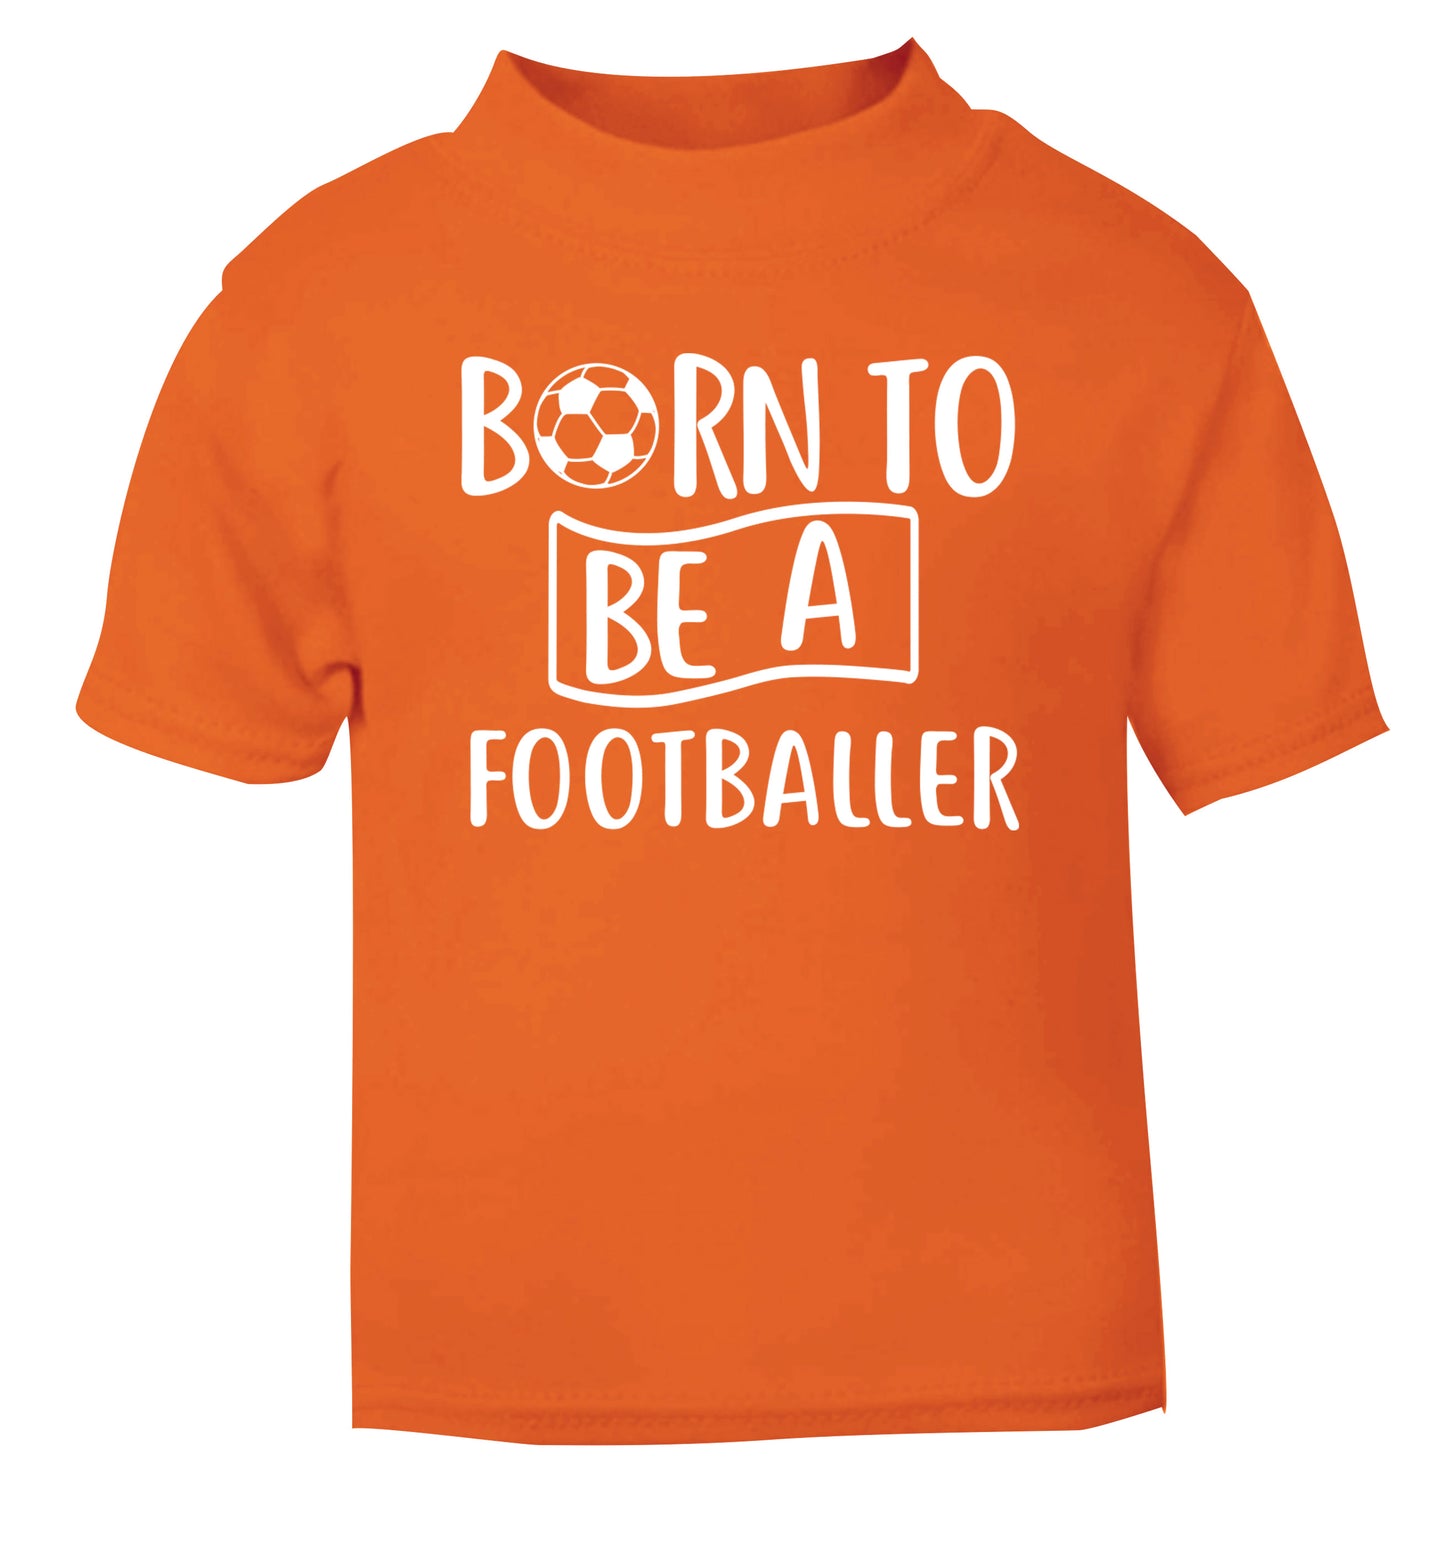 Born to be a footballer orange Baby Toddler Tshirt 2 Years